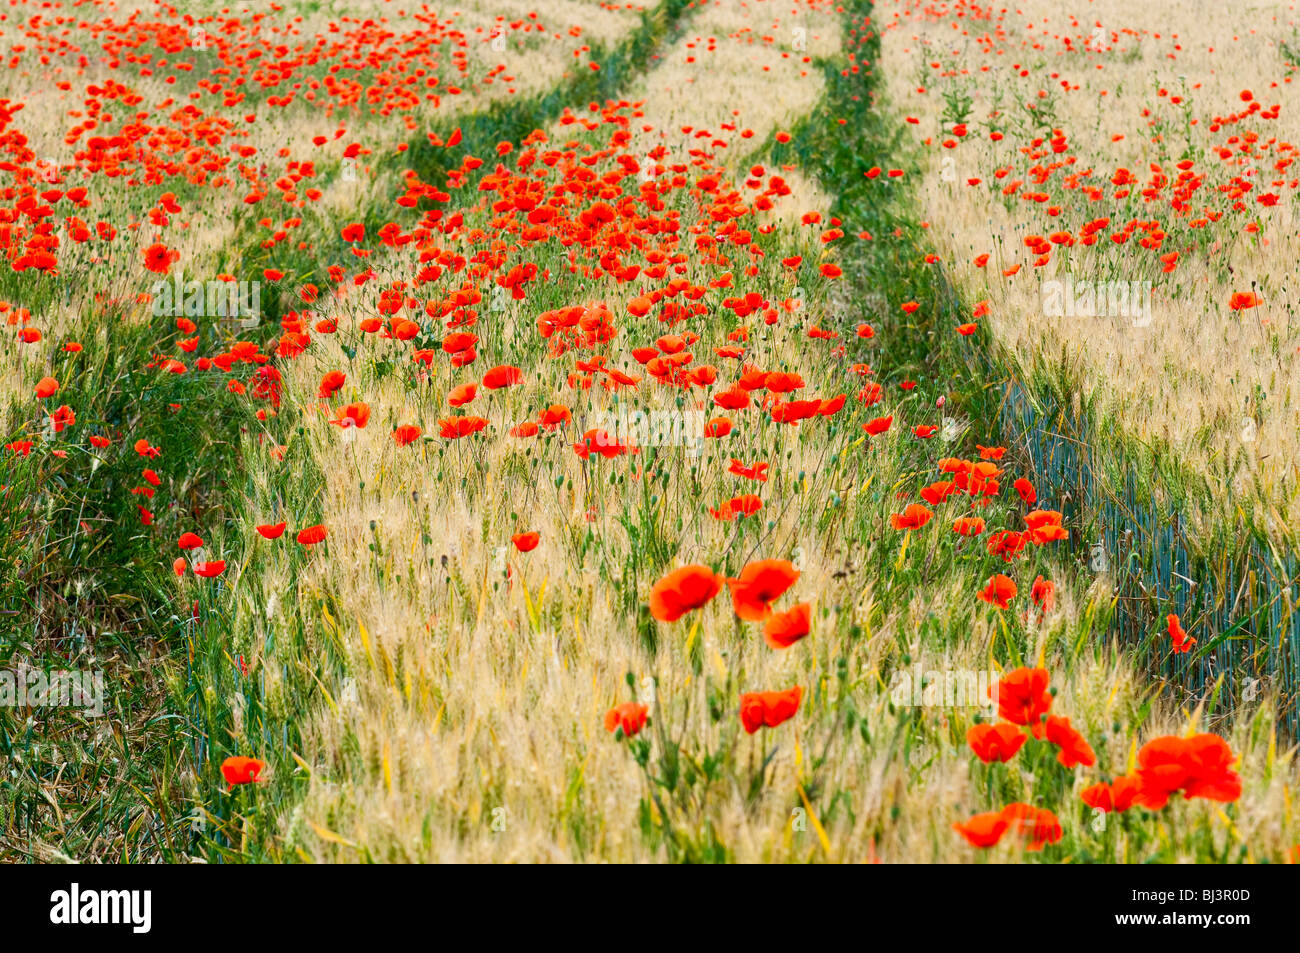 Swathe of Common Poppies in barley field - Indre-et-Loire, France. Stock Photo